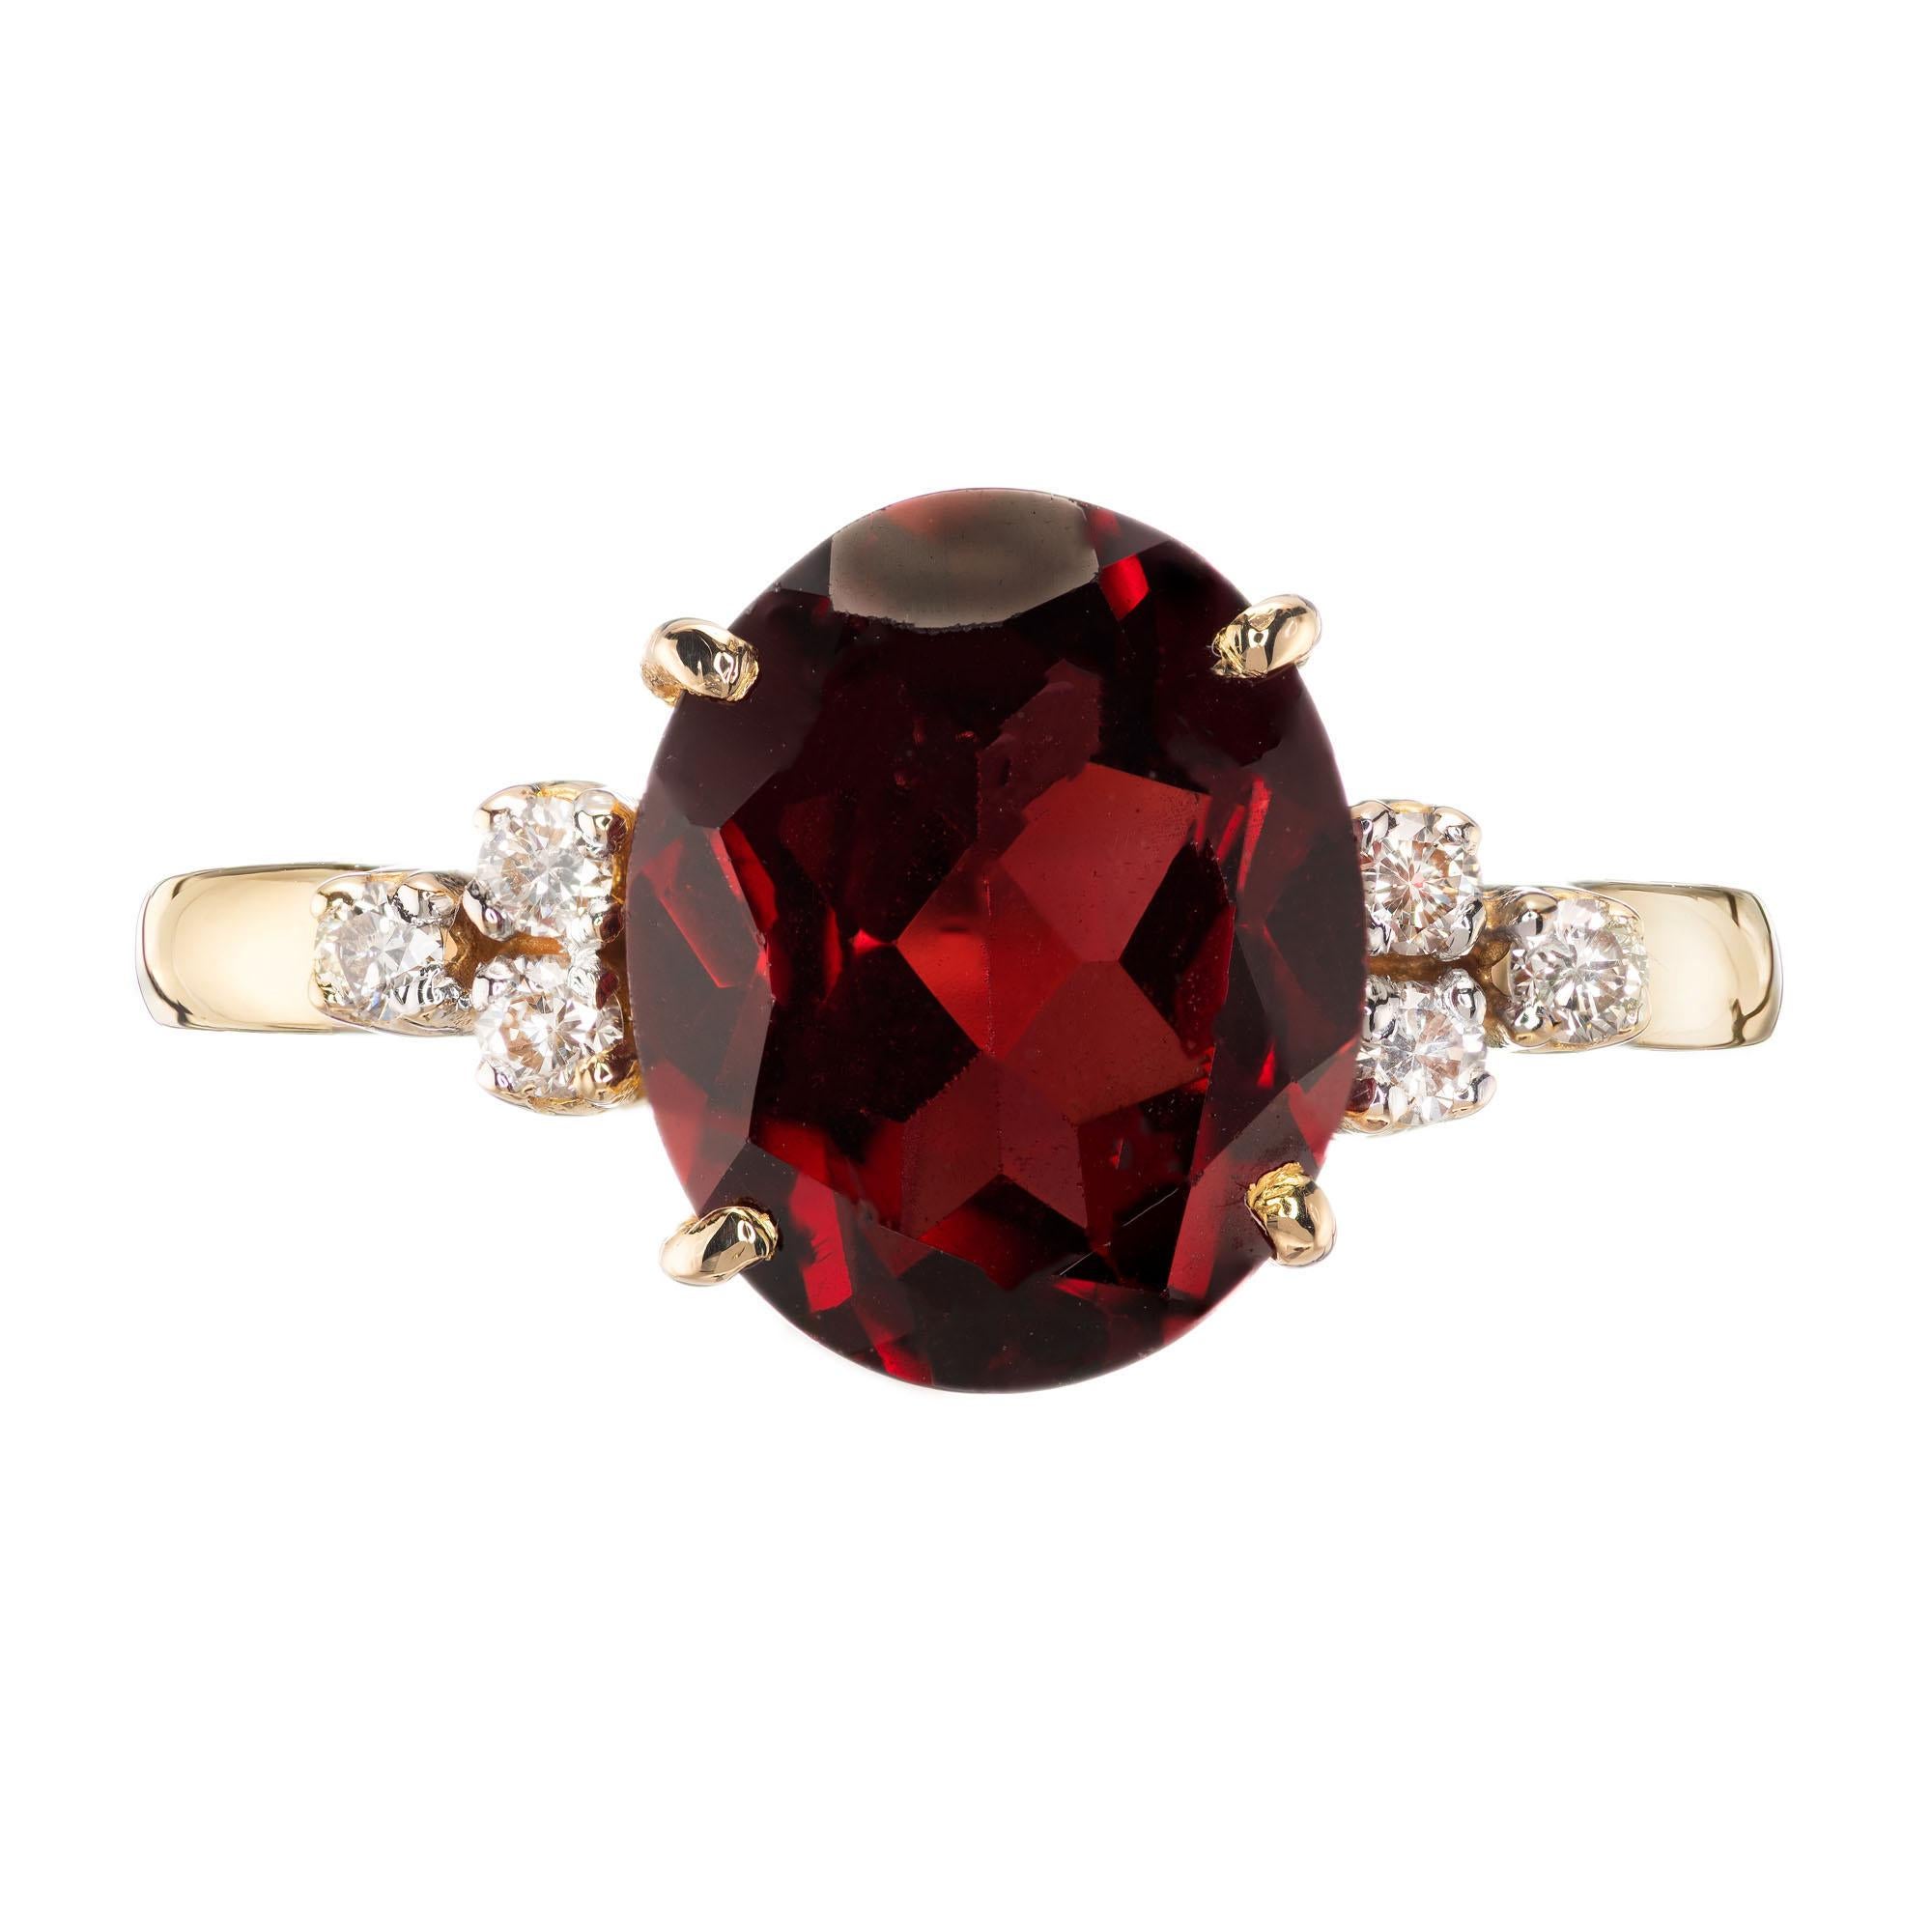 Reddish brown 3.70 carat garnet and 8 round accent diamonds in an 18k yellow gold setting. 

1 oval cut reddish brown garnet, VS approx. 3.70cts
8 round brilliant cut diamonds, I-J VS approx. .10cts
Size 7 and sizable
18k yellow gold 
Stamped: